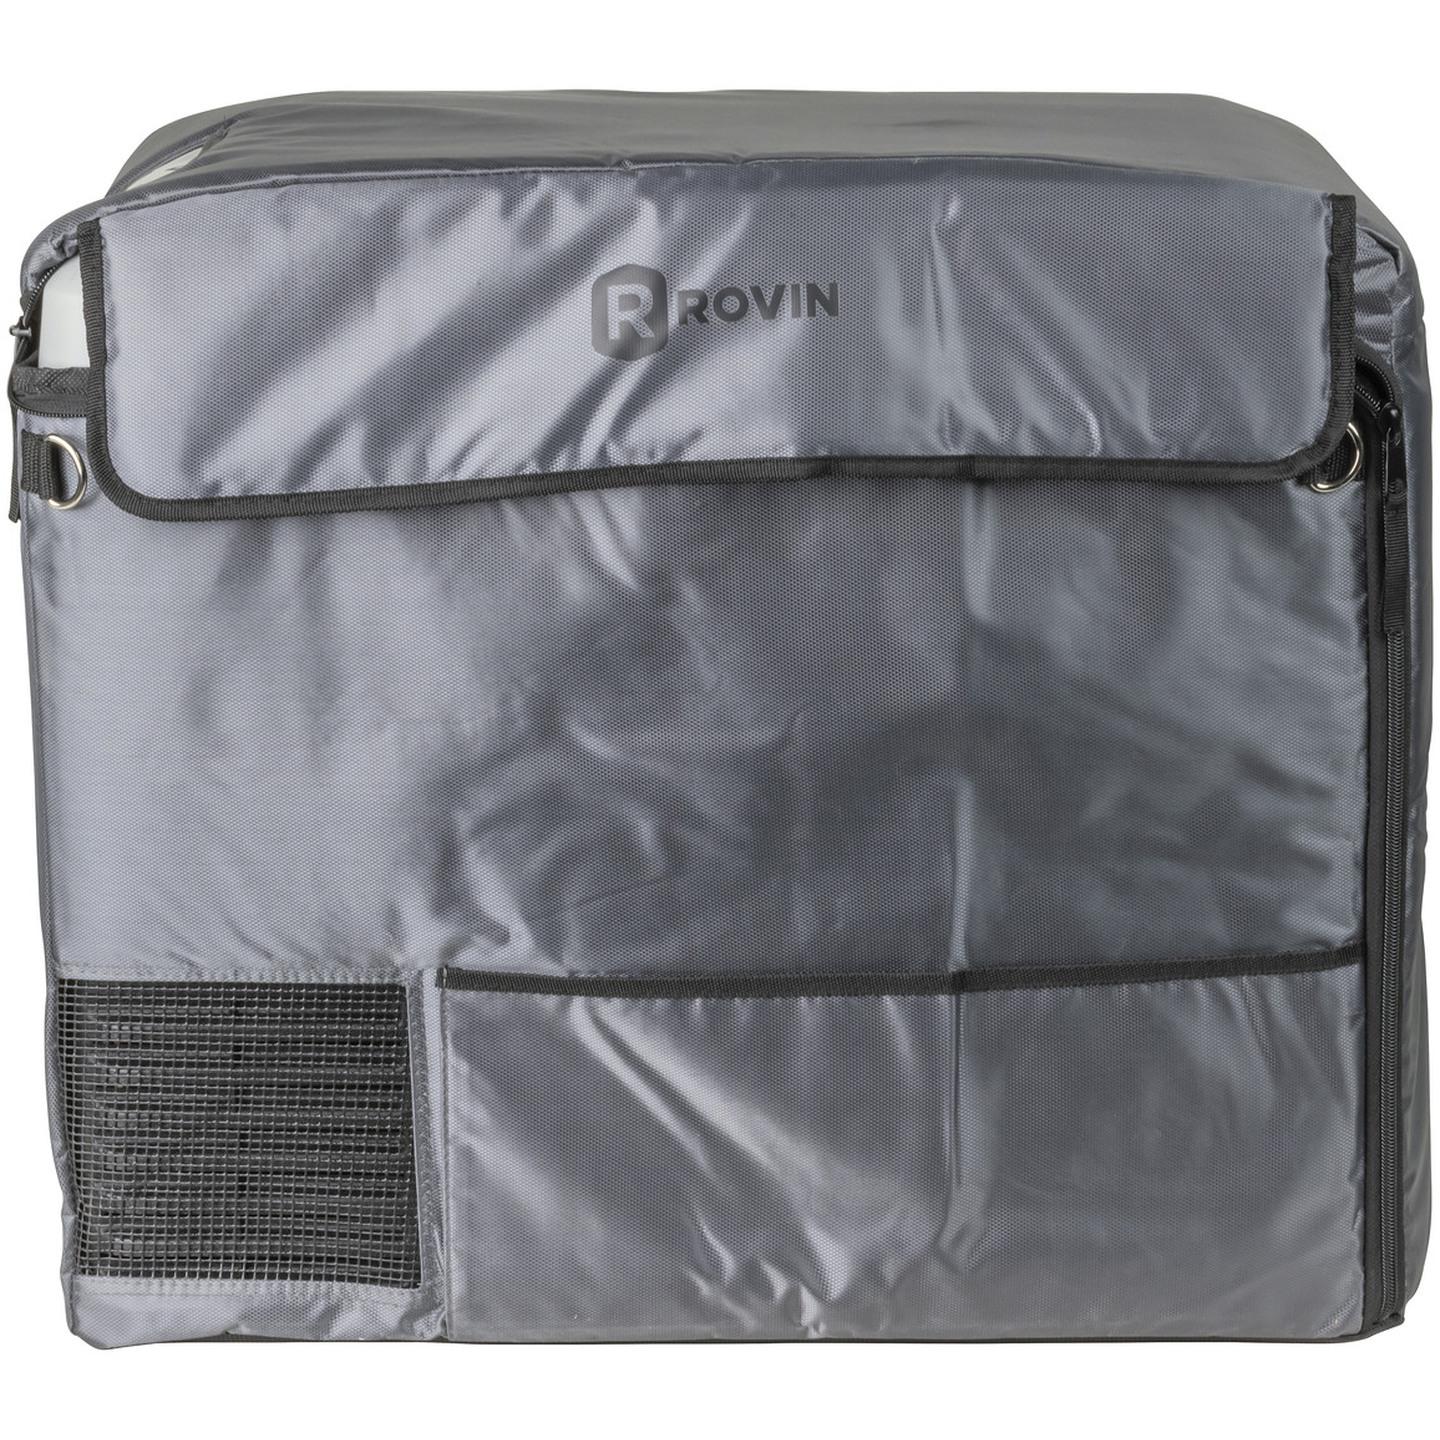 Grey Insulated Cover for 50L Rovin Portable Fridge Freezer